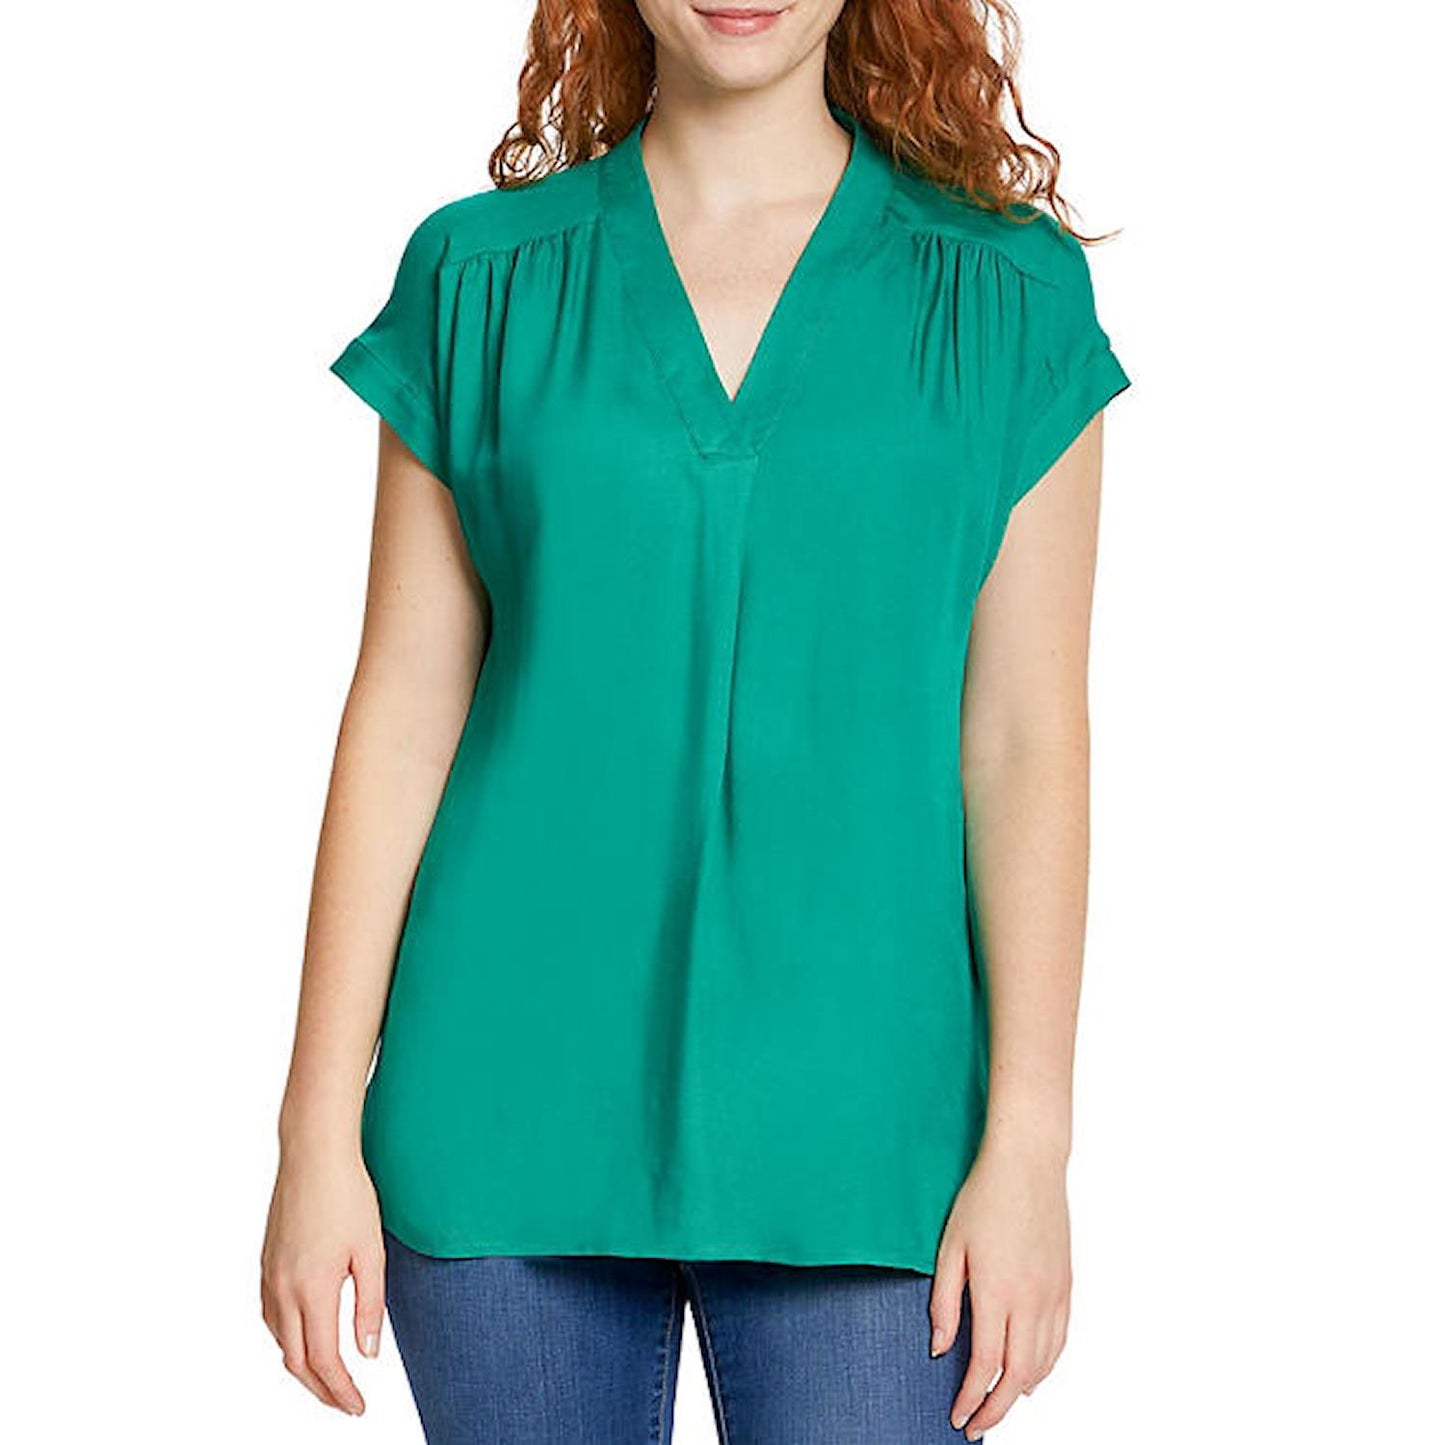 Nine West Women's Lightweight Relaxed Fit Woven Popover V-Neck Top